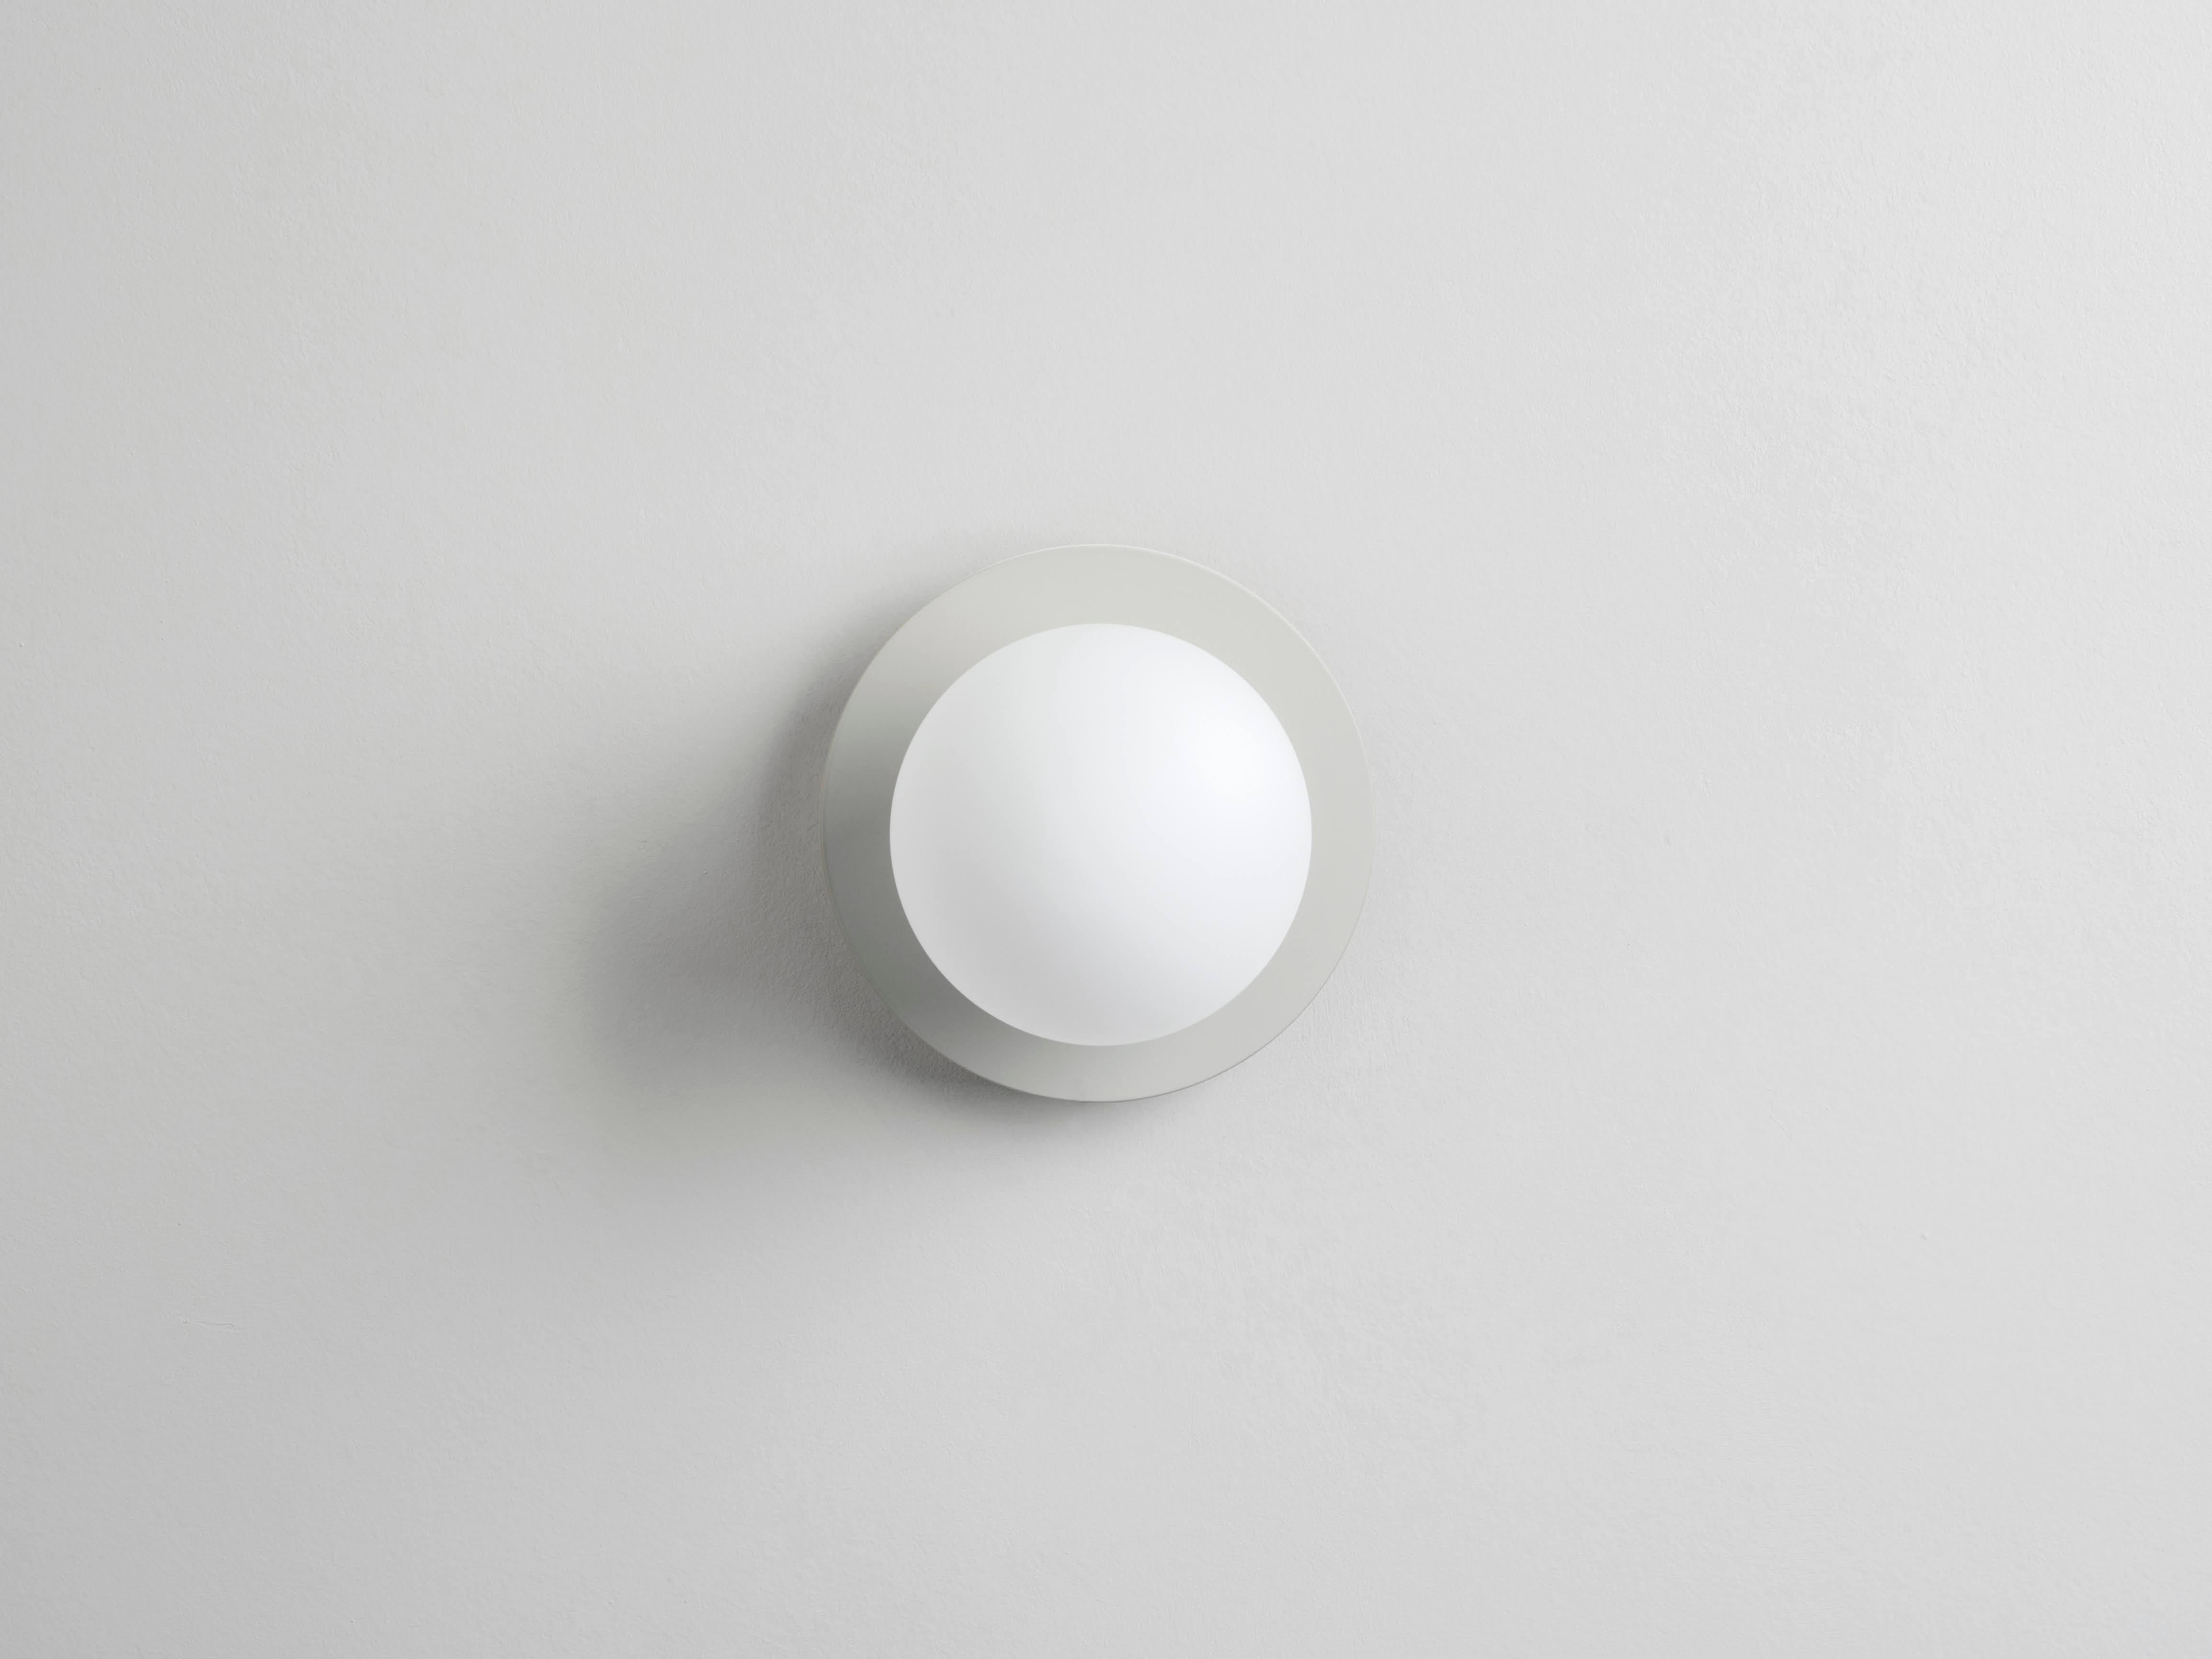 This modern wall light works everywhere. The disk mounted, opal glass shade, diffuses a warm illuminating glow. Ideal for a living space, kitchen, bedroom or bathroom. Or sand is the houseof staple that accentuates and emphasises. The soft block